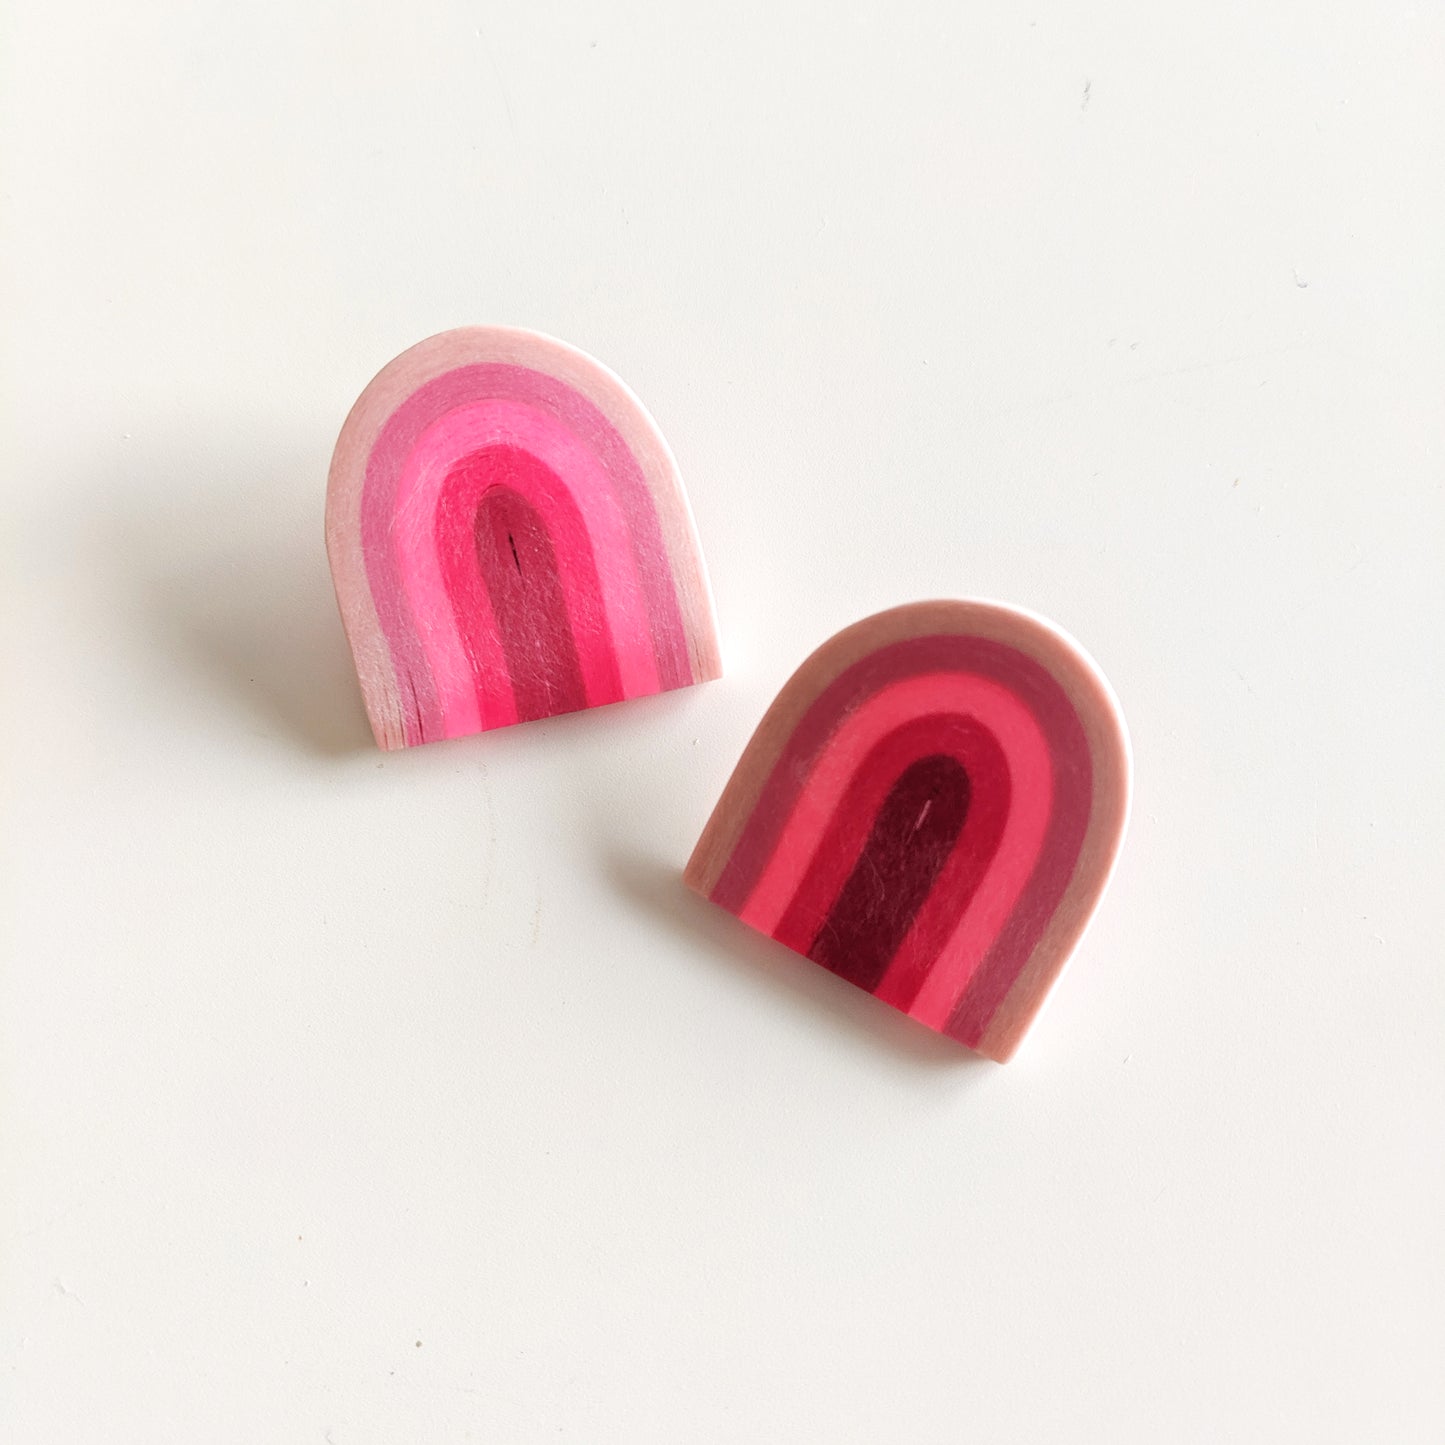 Earrings made from compressed paper with a titanium stud. Umbrella shaped in bubblegum pink color.